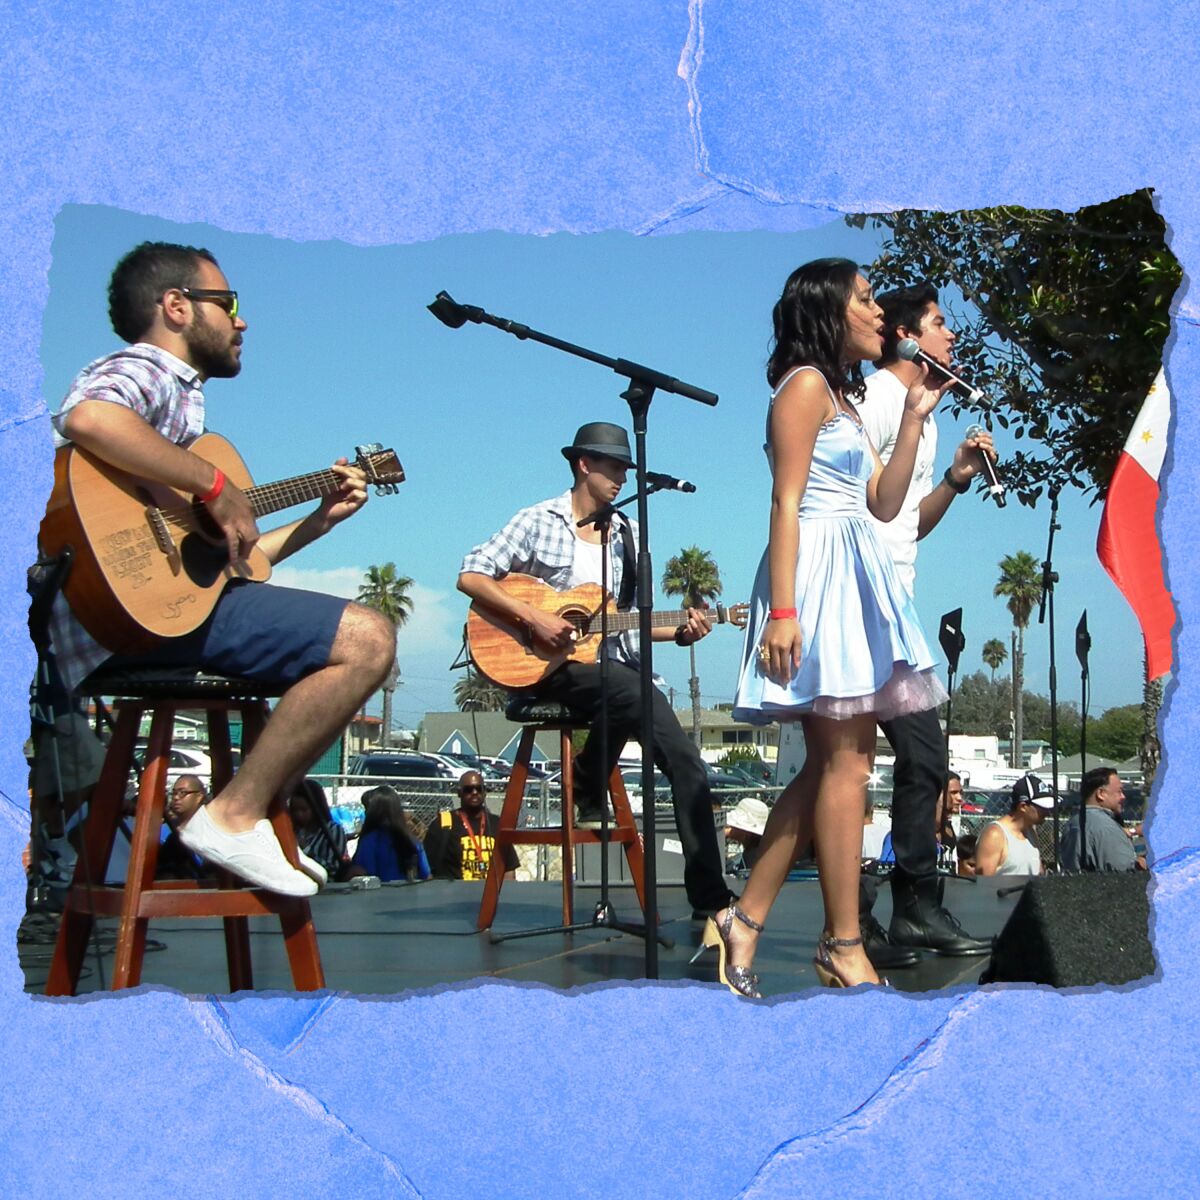 A young man and woman sing in front of two men sitting on stools and playing guitars on an outdoor stage.